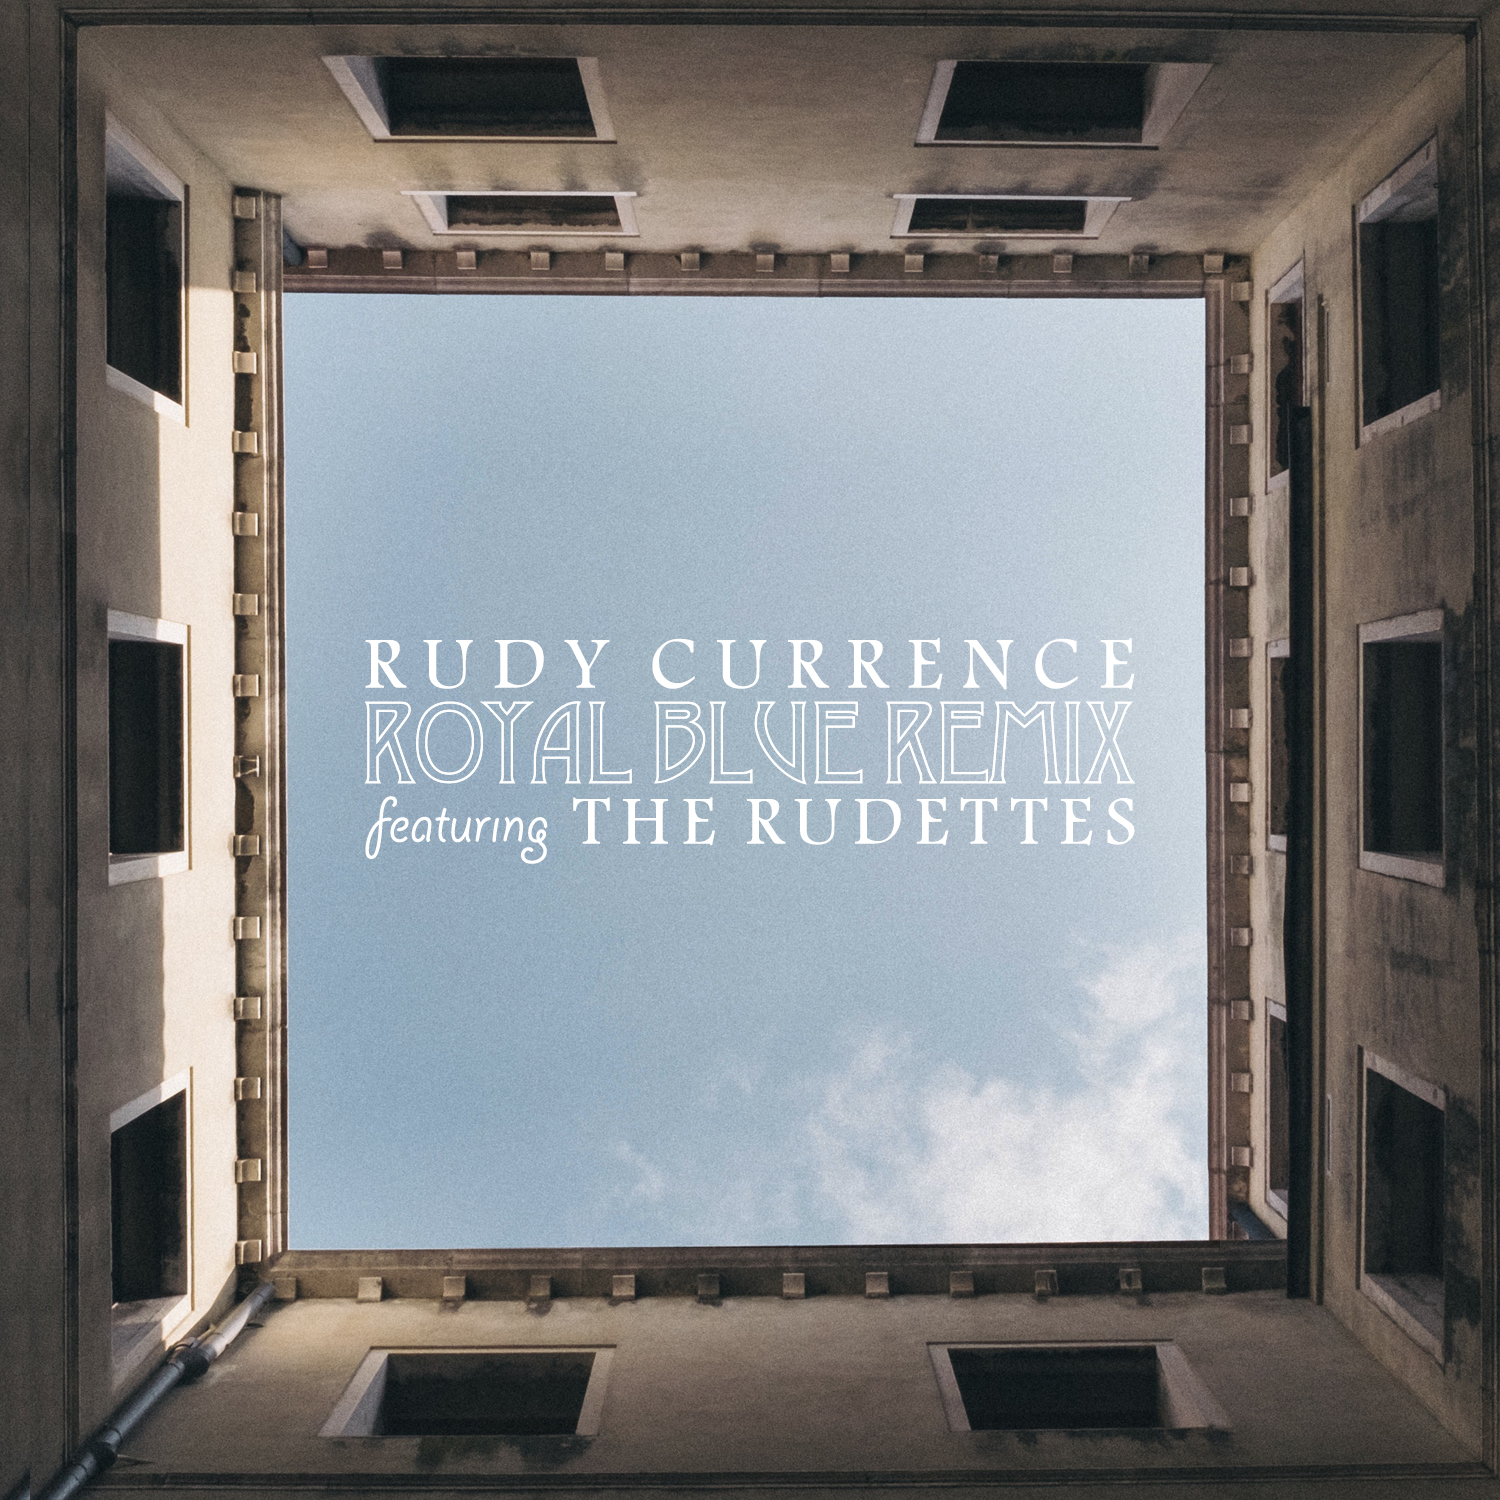 Rudy Currence Royal Blue Remix